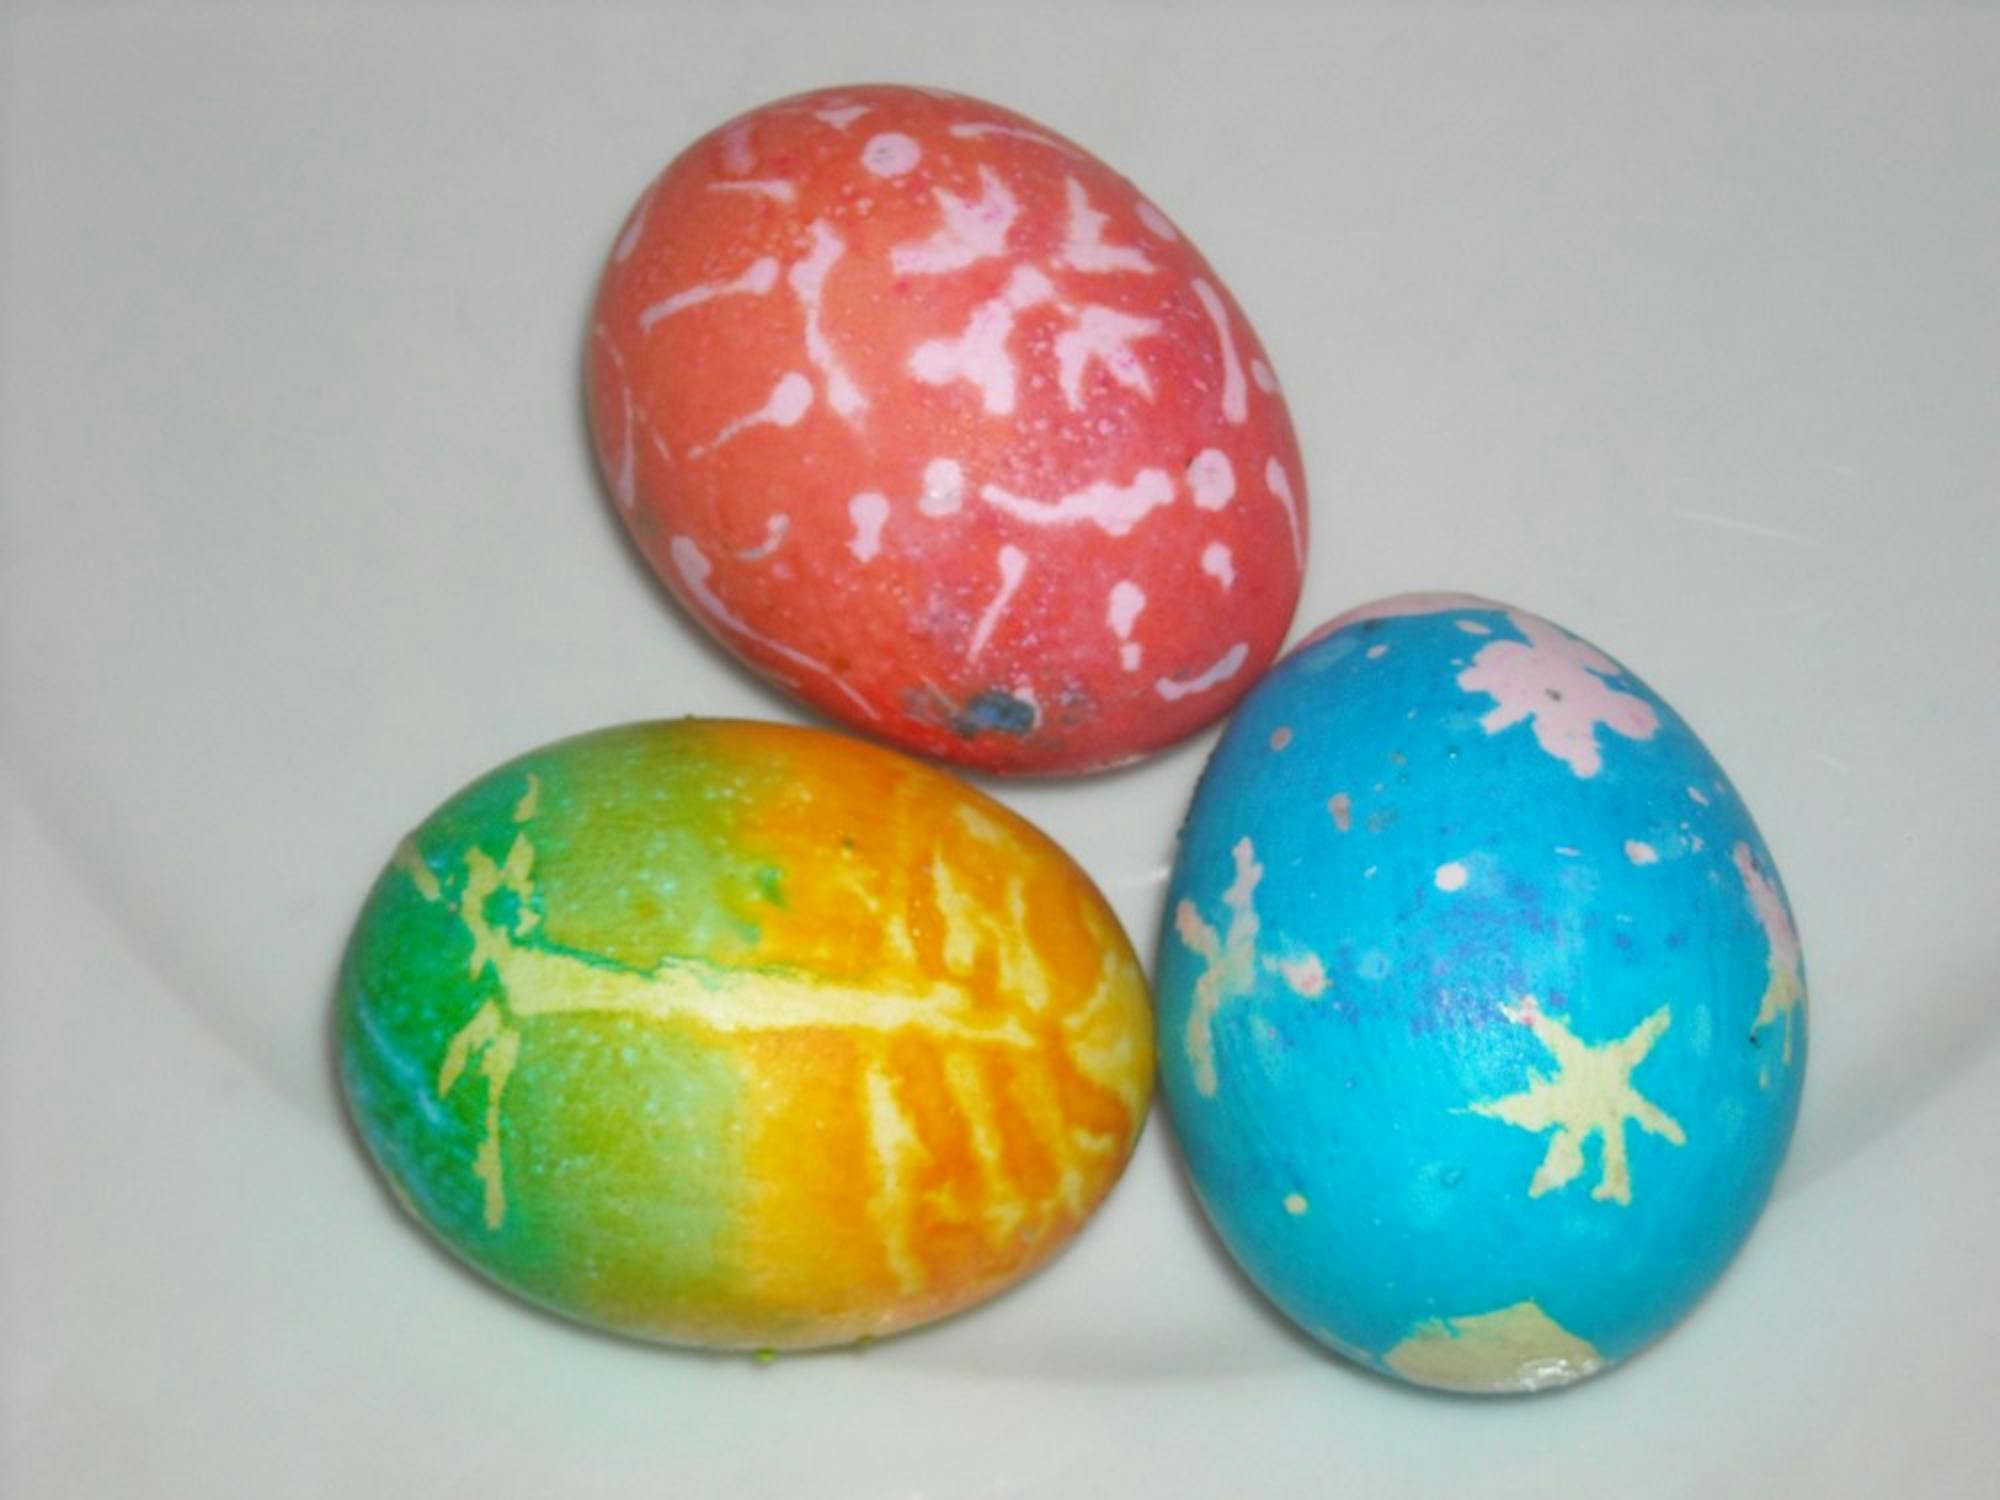 	Pysanky is a Ukrainian technique using wax to create designs on colored eggs.